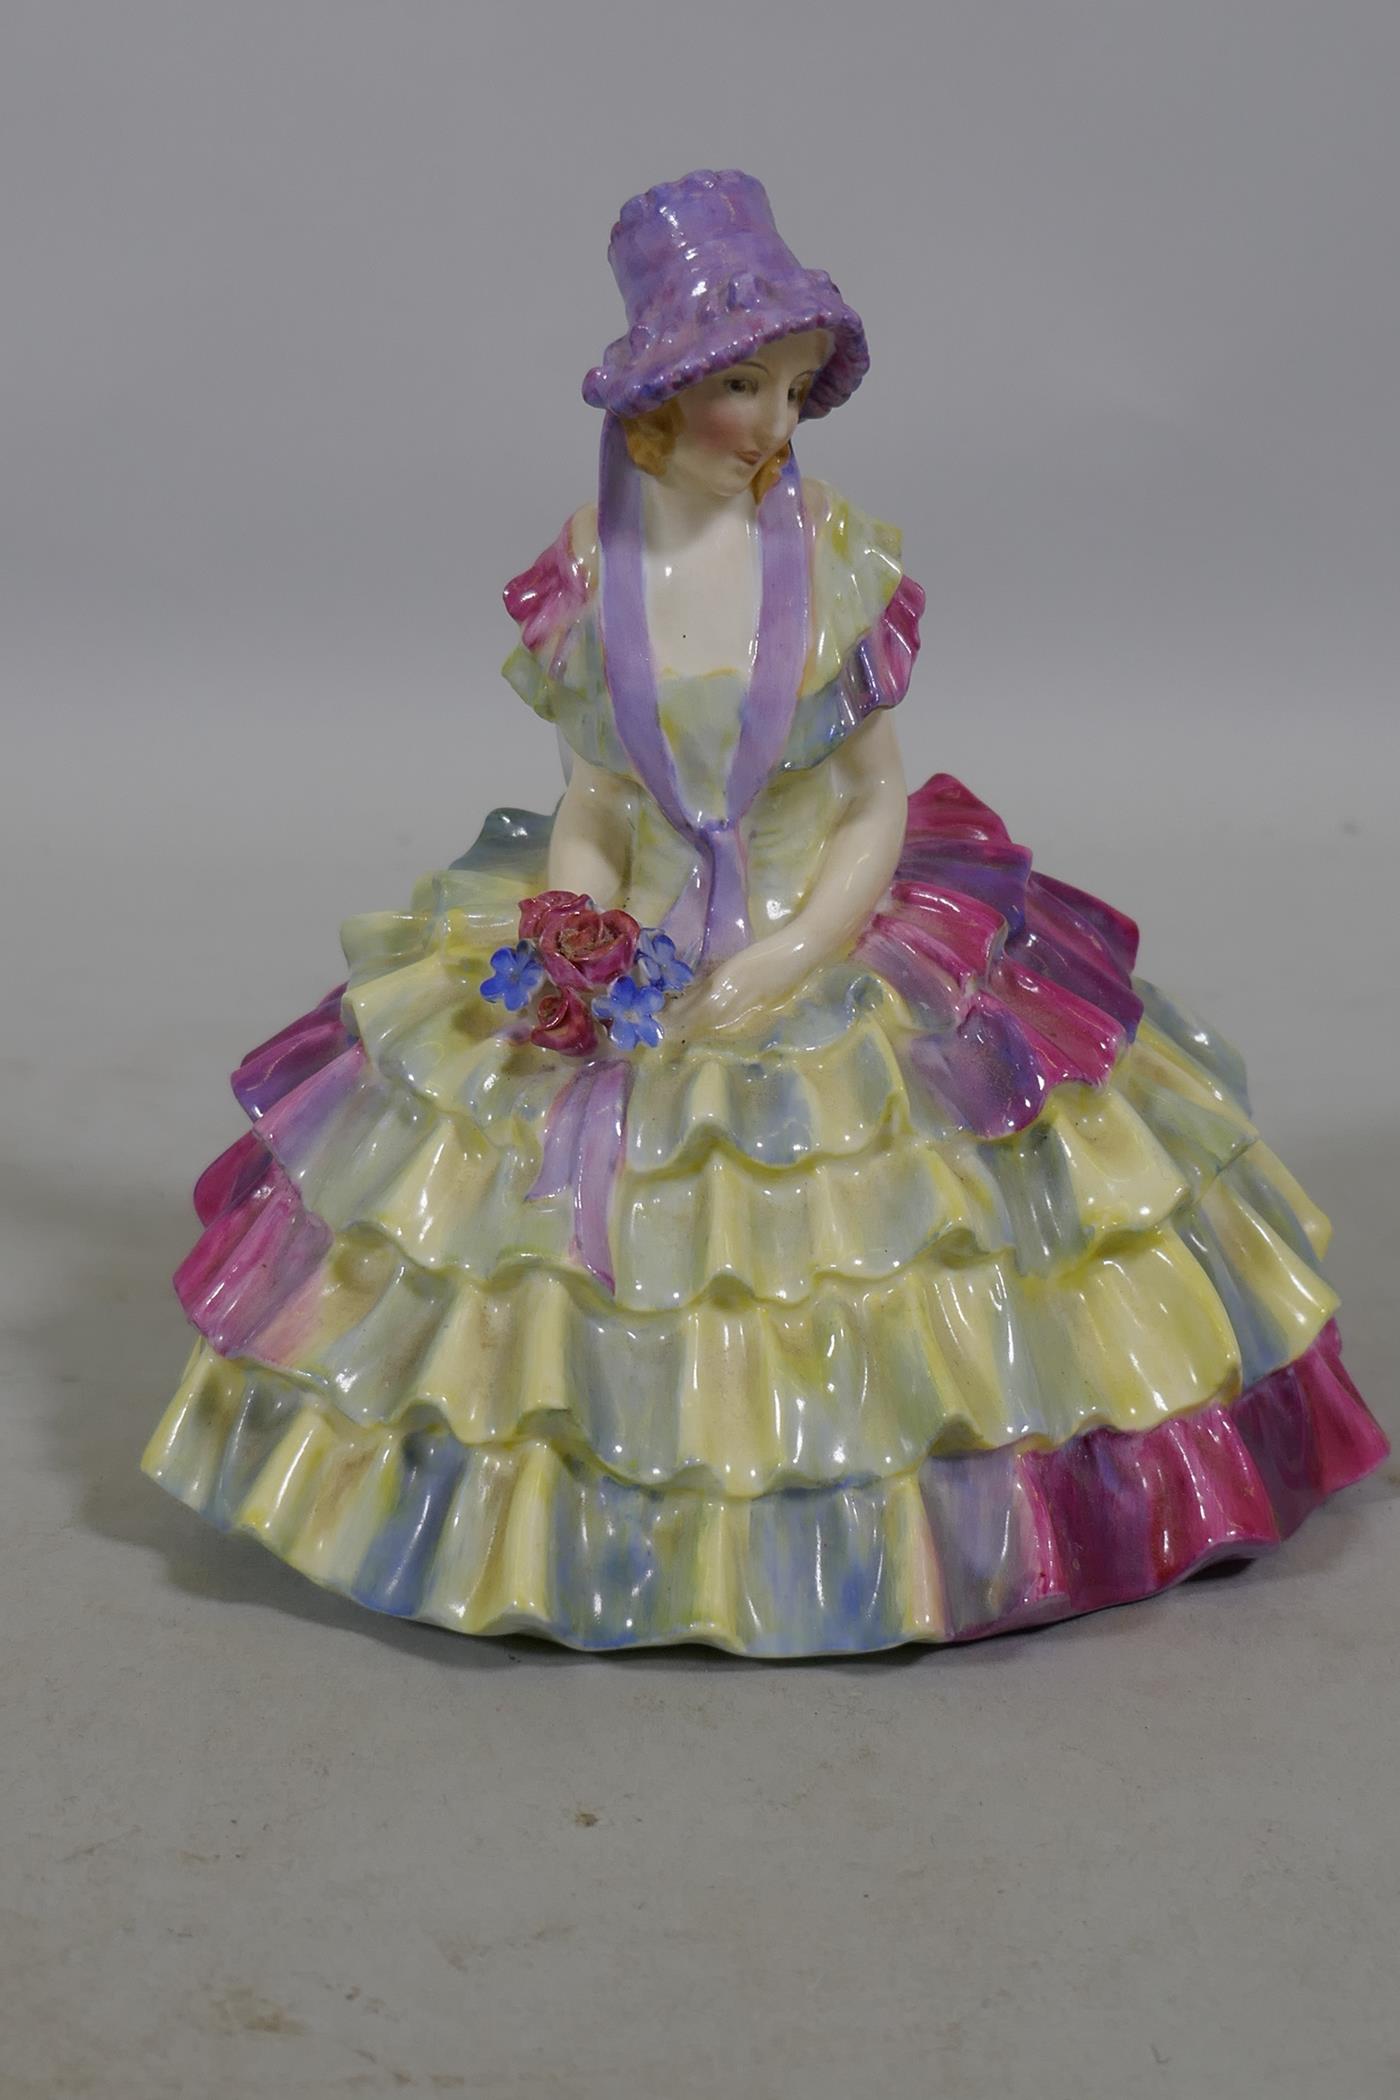 Royal Doulton figure, Chloe, Rd No. 764558, signed by Eric Webster, E.A.W., 1933, inscribed on the